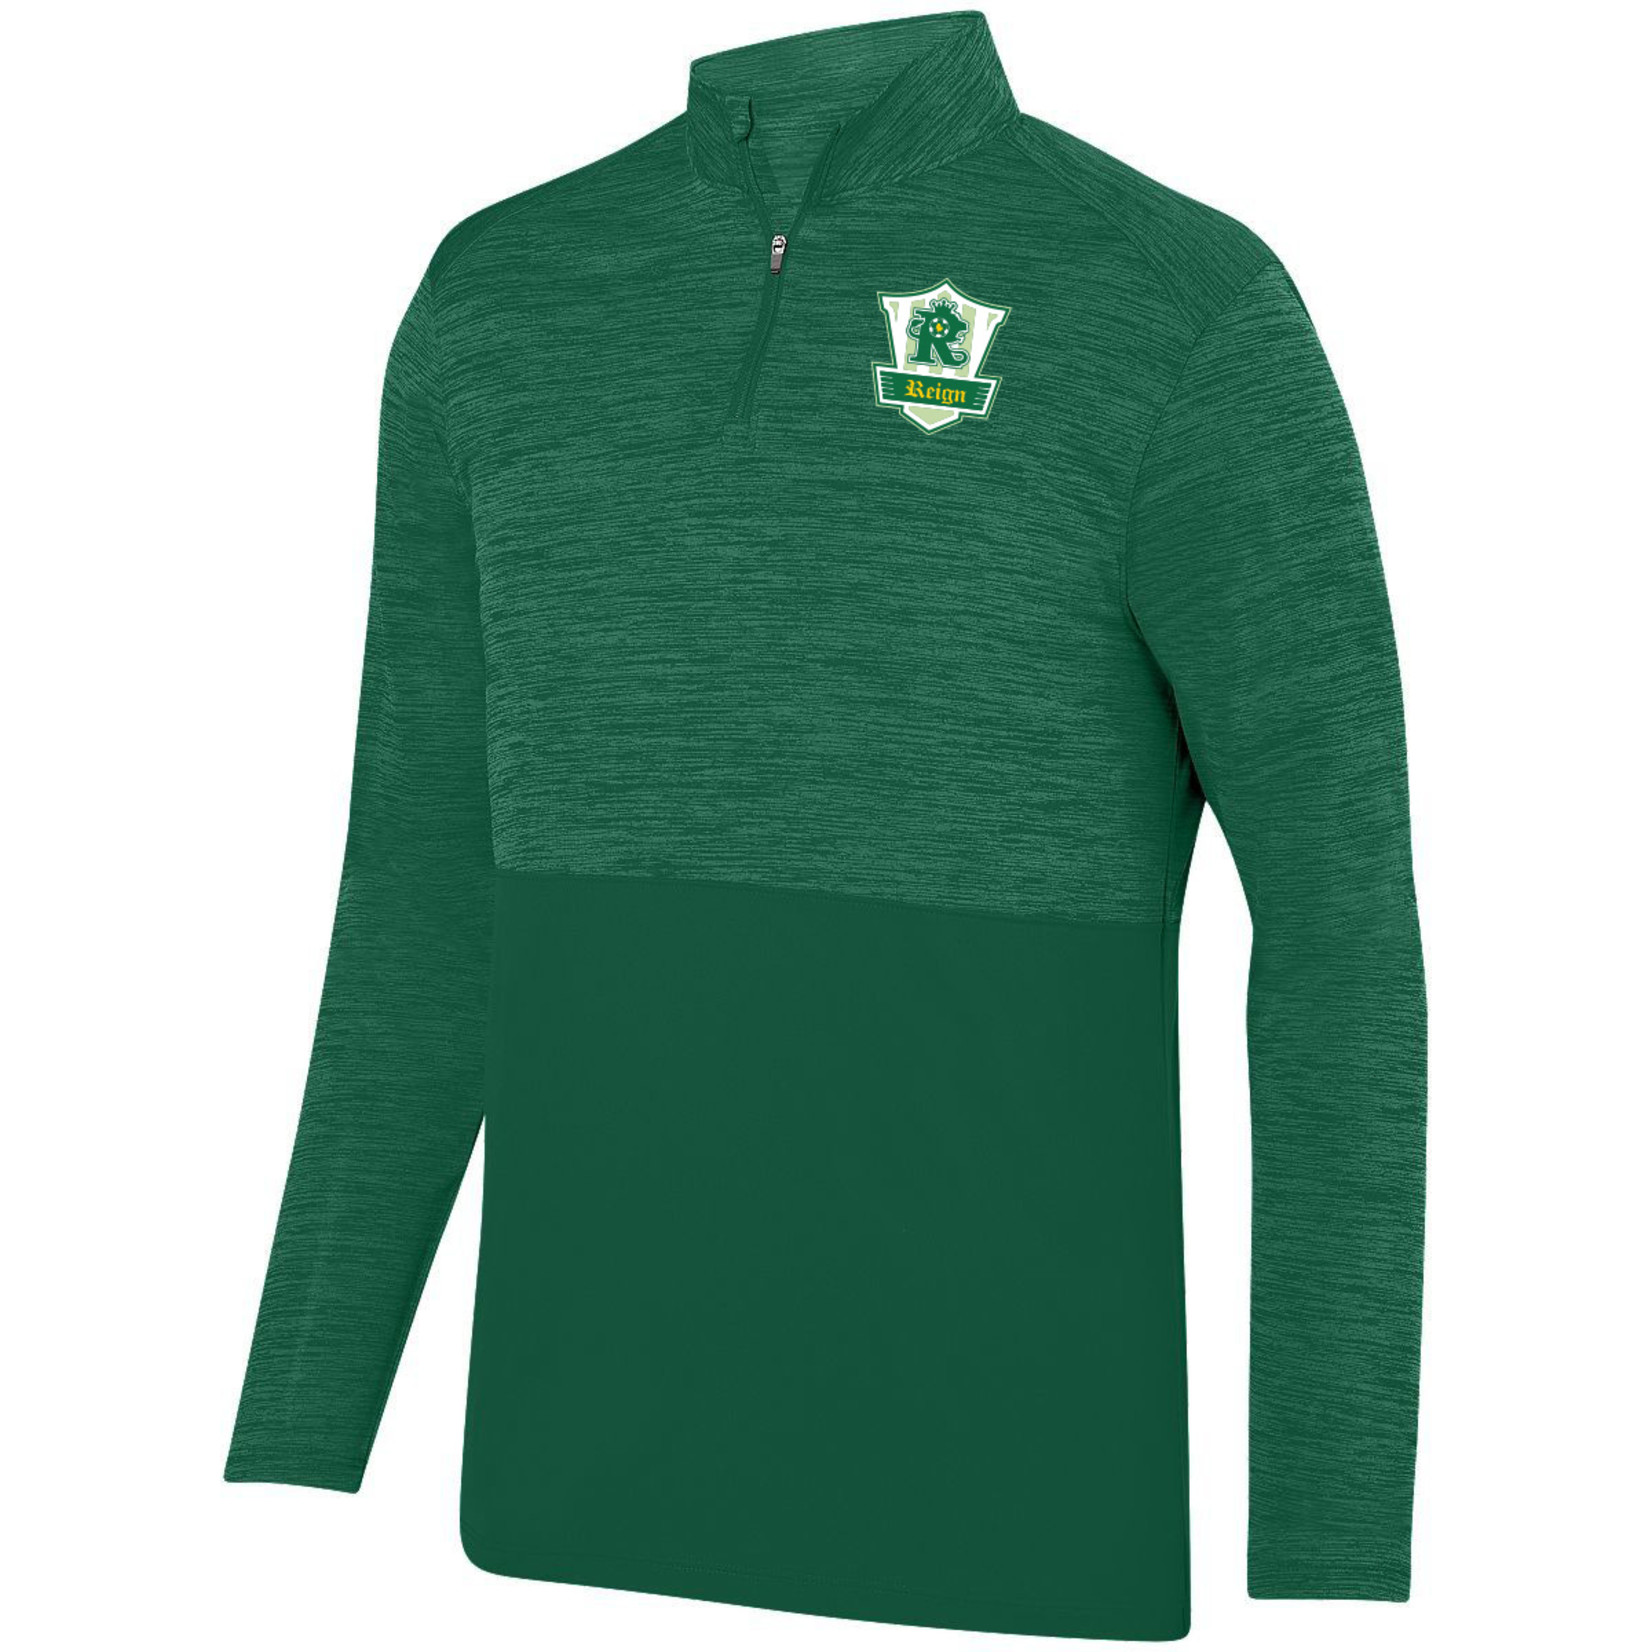 PLYMOUTH REIGN SHADOW TONAL HEATHER 1/4 ZIP PULLOVER (GREEN)